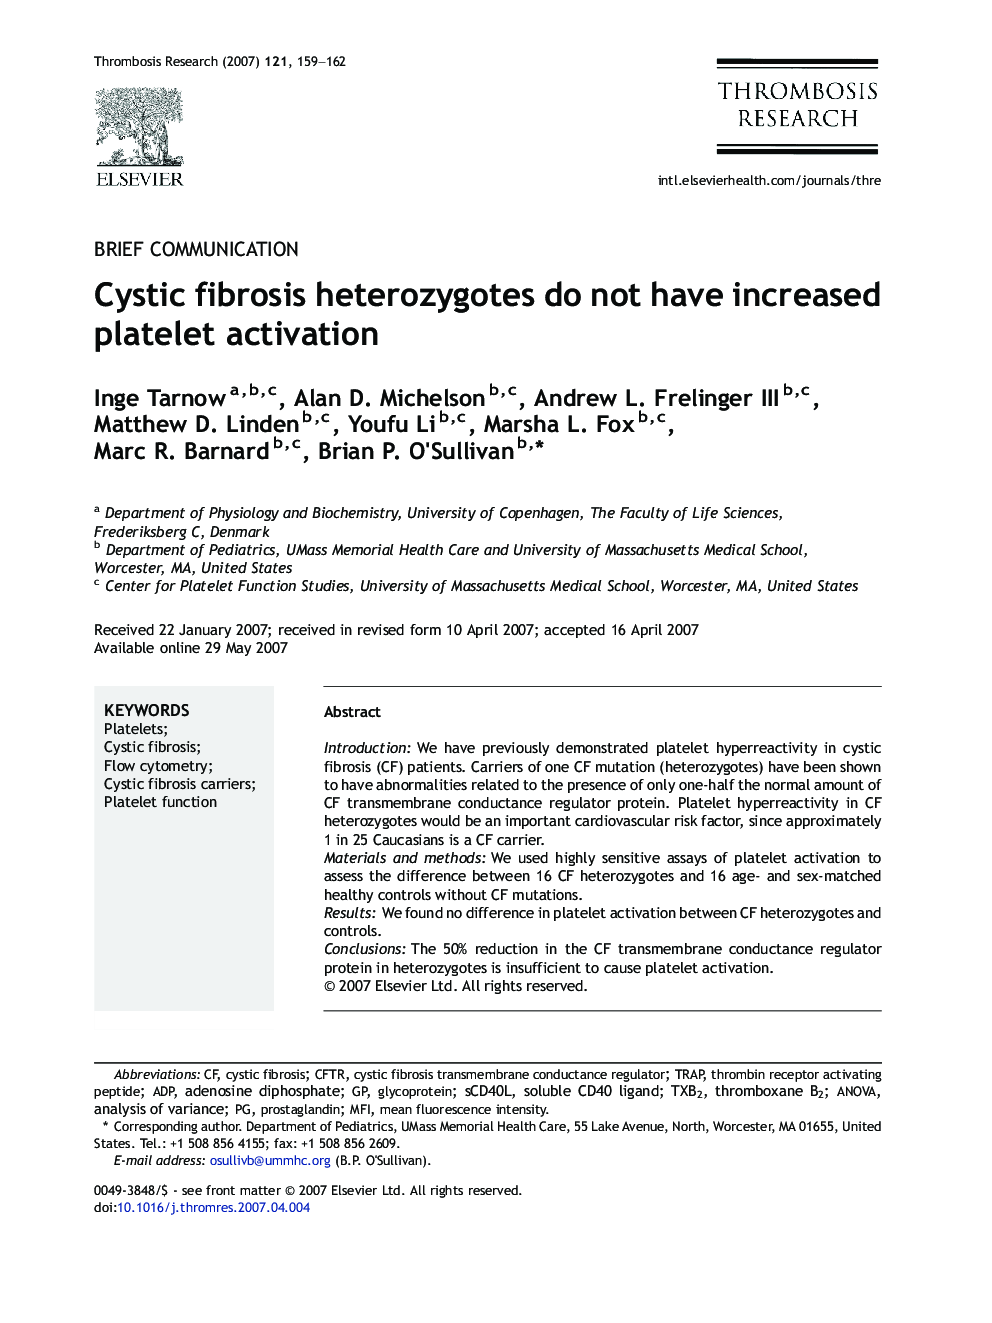 Cystic fibrosis heterozygotes do not have increased platelet activation